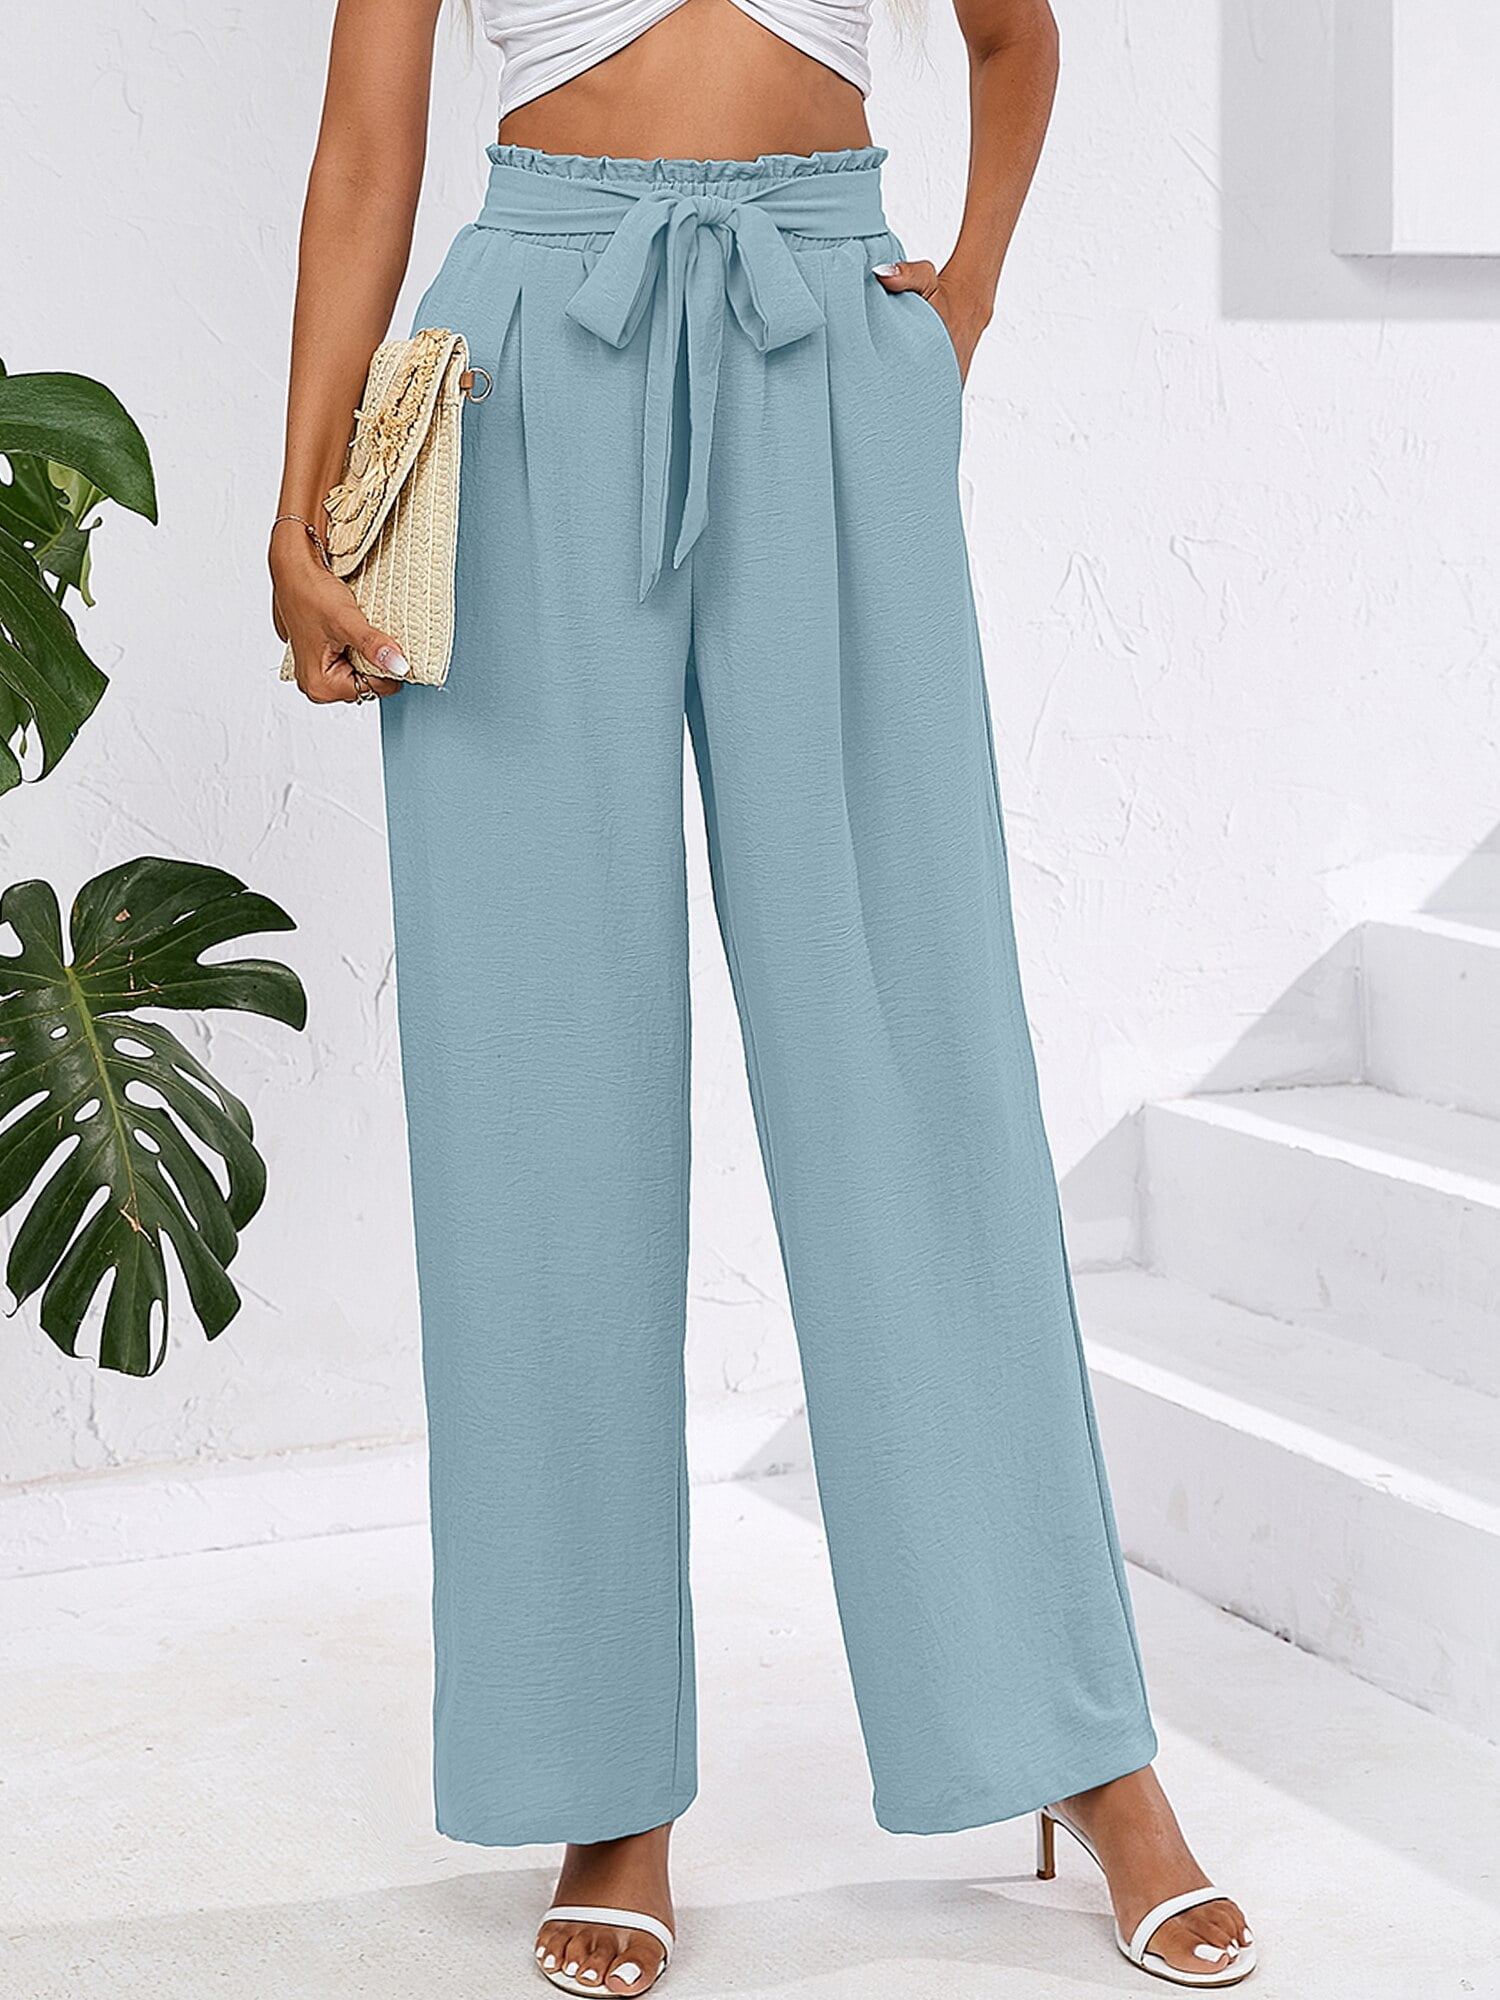 SV Latest designer stylish stretchable casual look Girls & Women Tie Knot  Pant, Girls & women Knotted Pant in Best Price